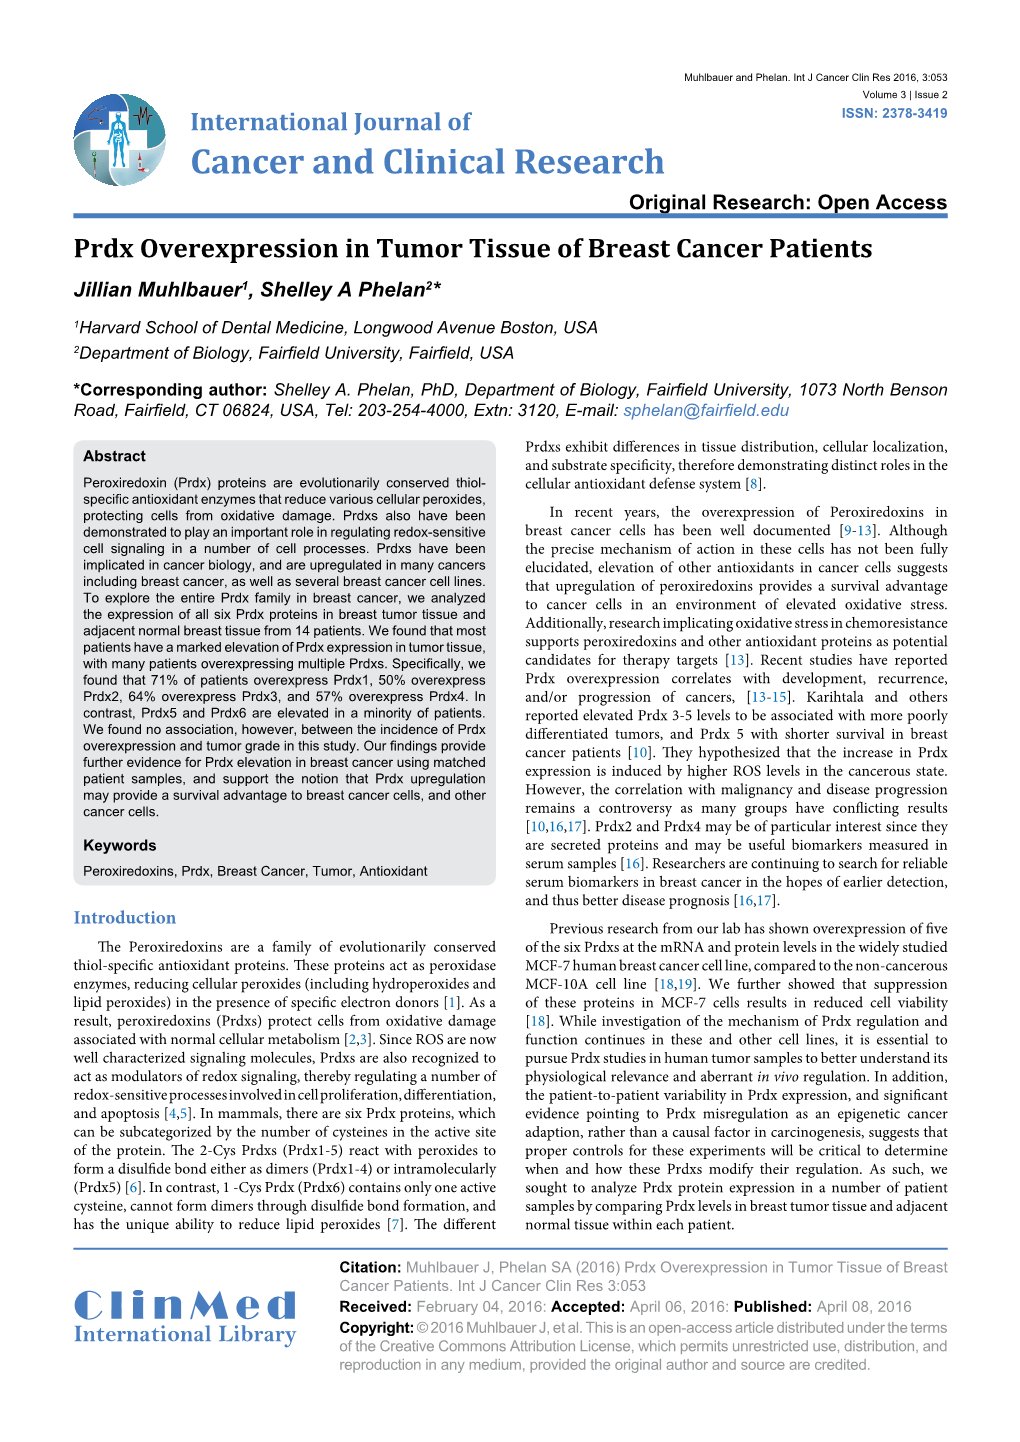 Prdx Overexpression in Tumor Tissue of Breast Cancer Patients Jillian Muhlbauer1, Shelley a Phelan2*